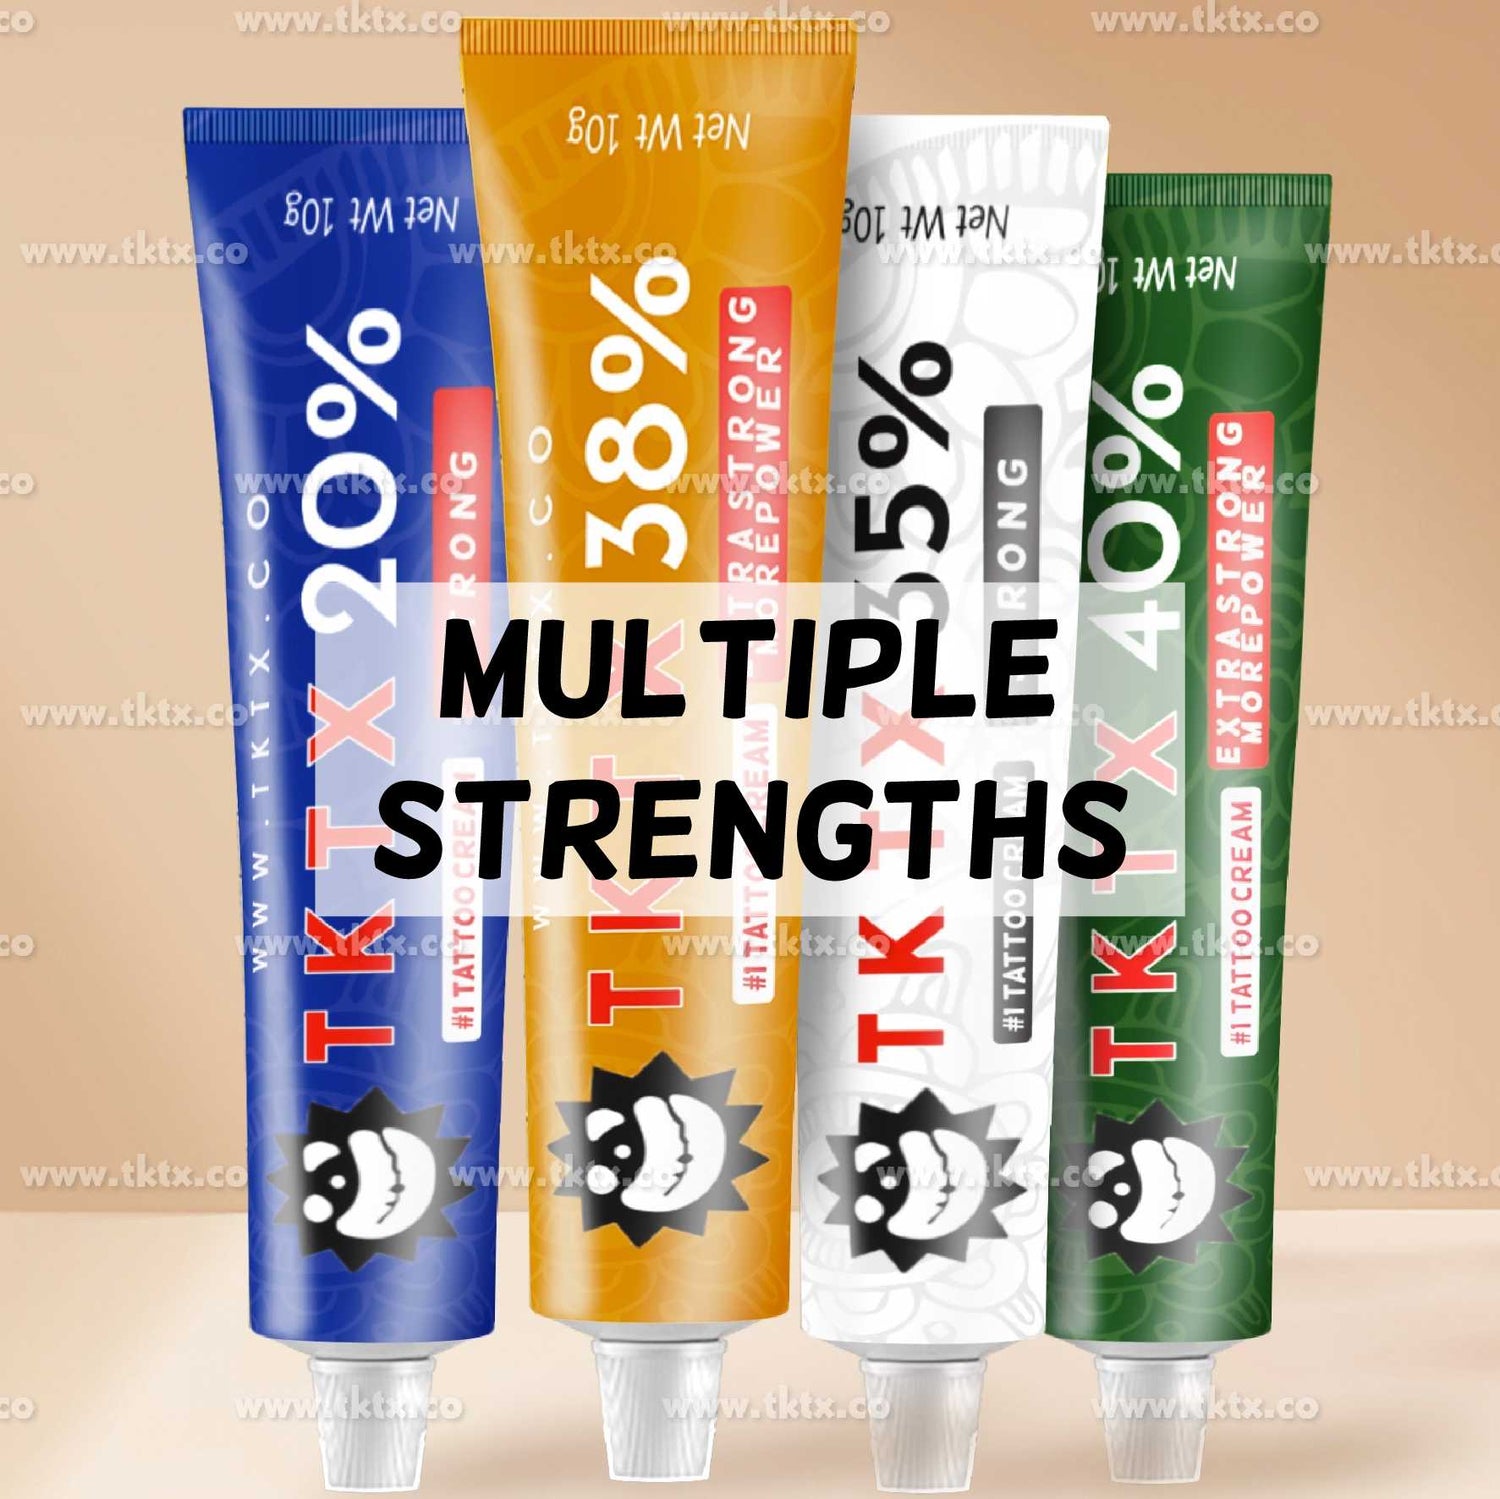 TKTX 35% White - STRONG - Numbing Cream TKTX